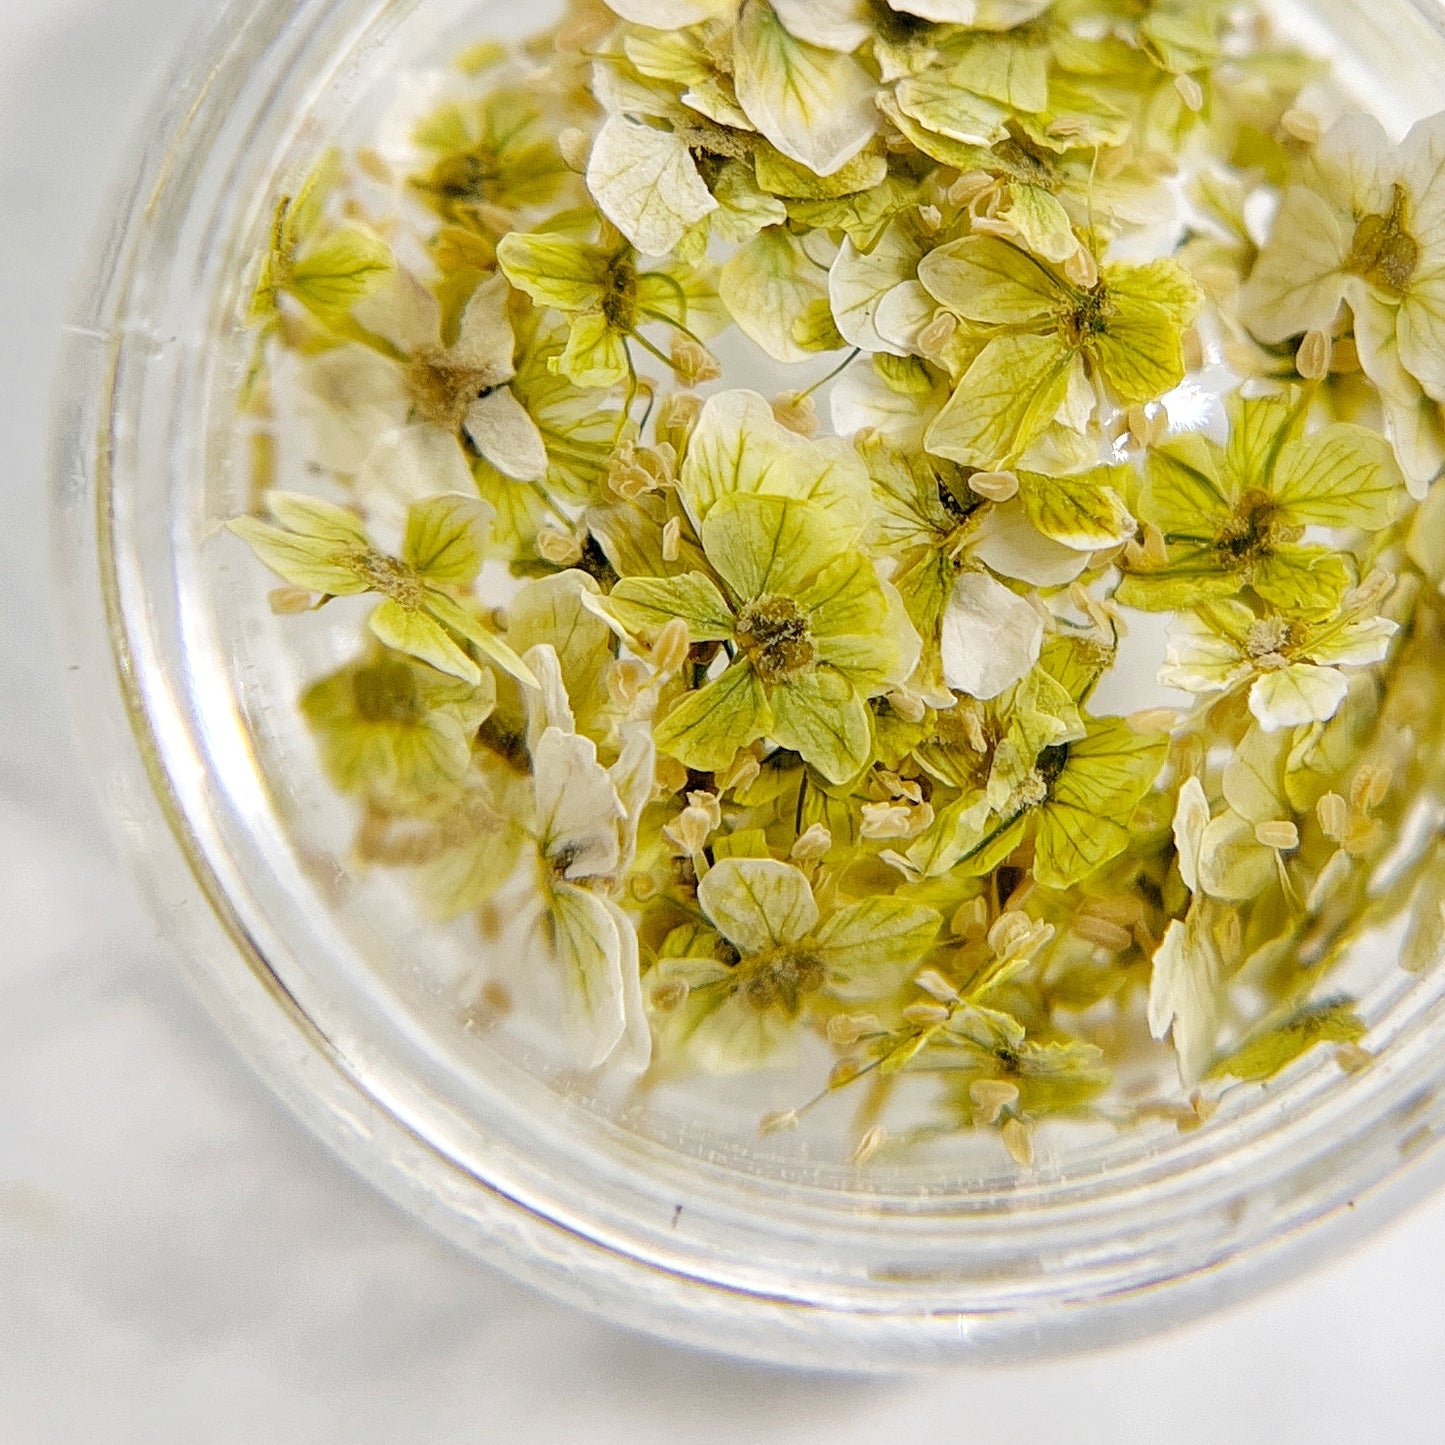 Petite Bloom in Chartreuse - Multi-Tonal Pale Green  Pressed Flower Mix in Jar, Presented on White Background.